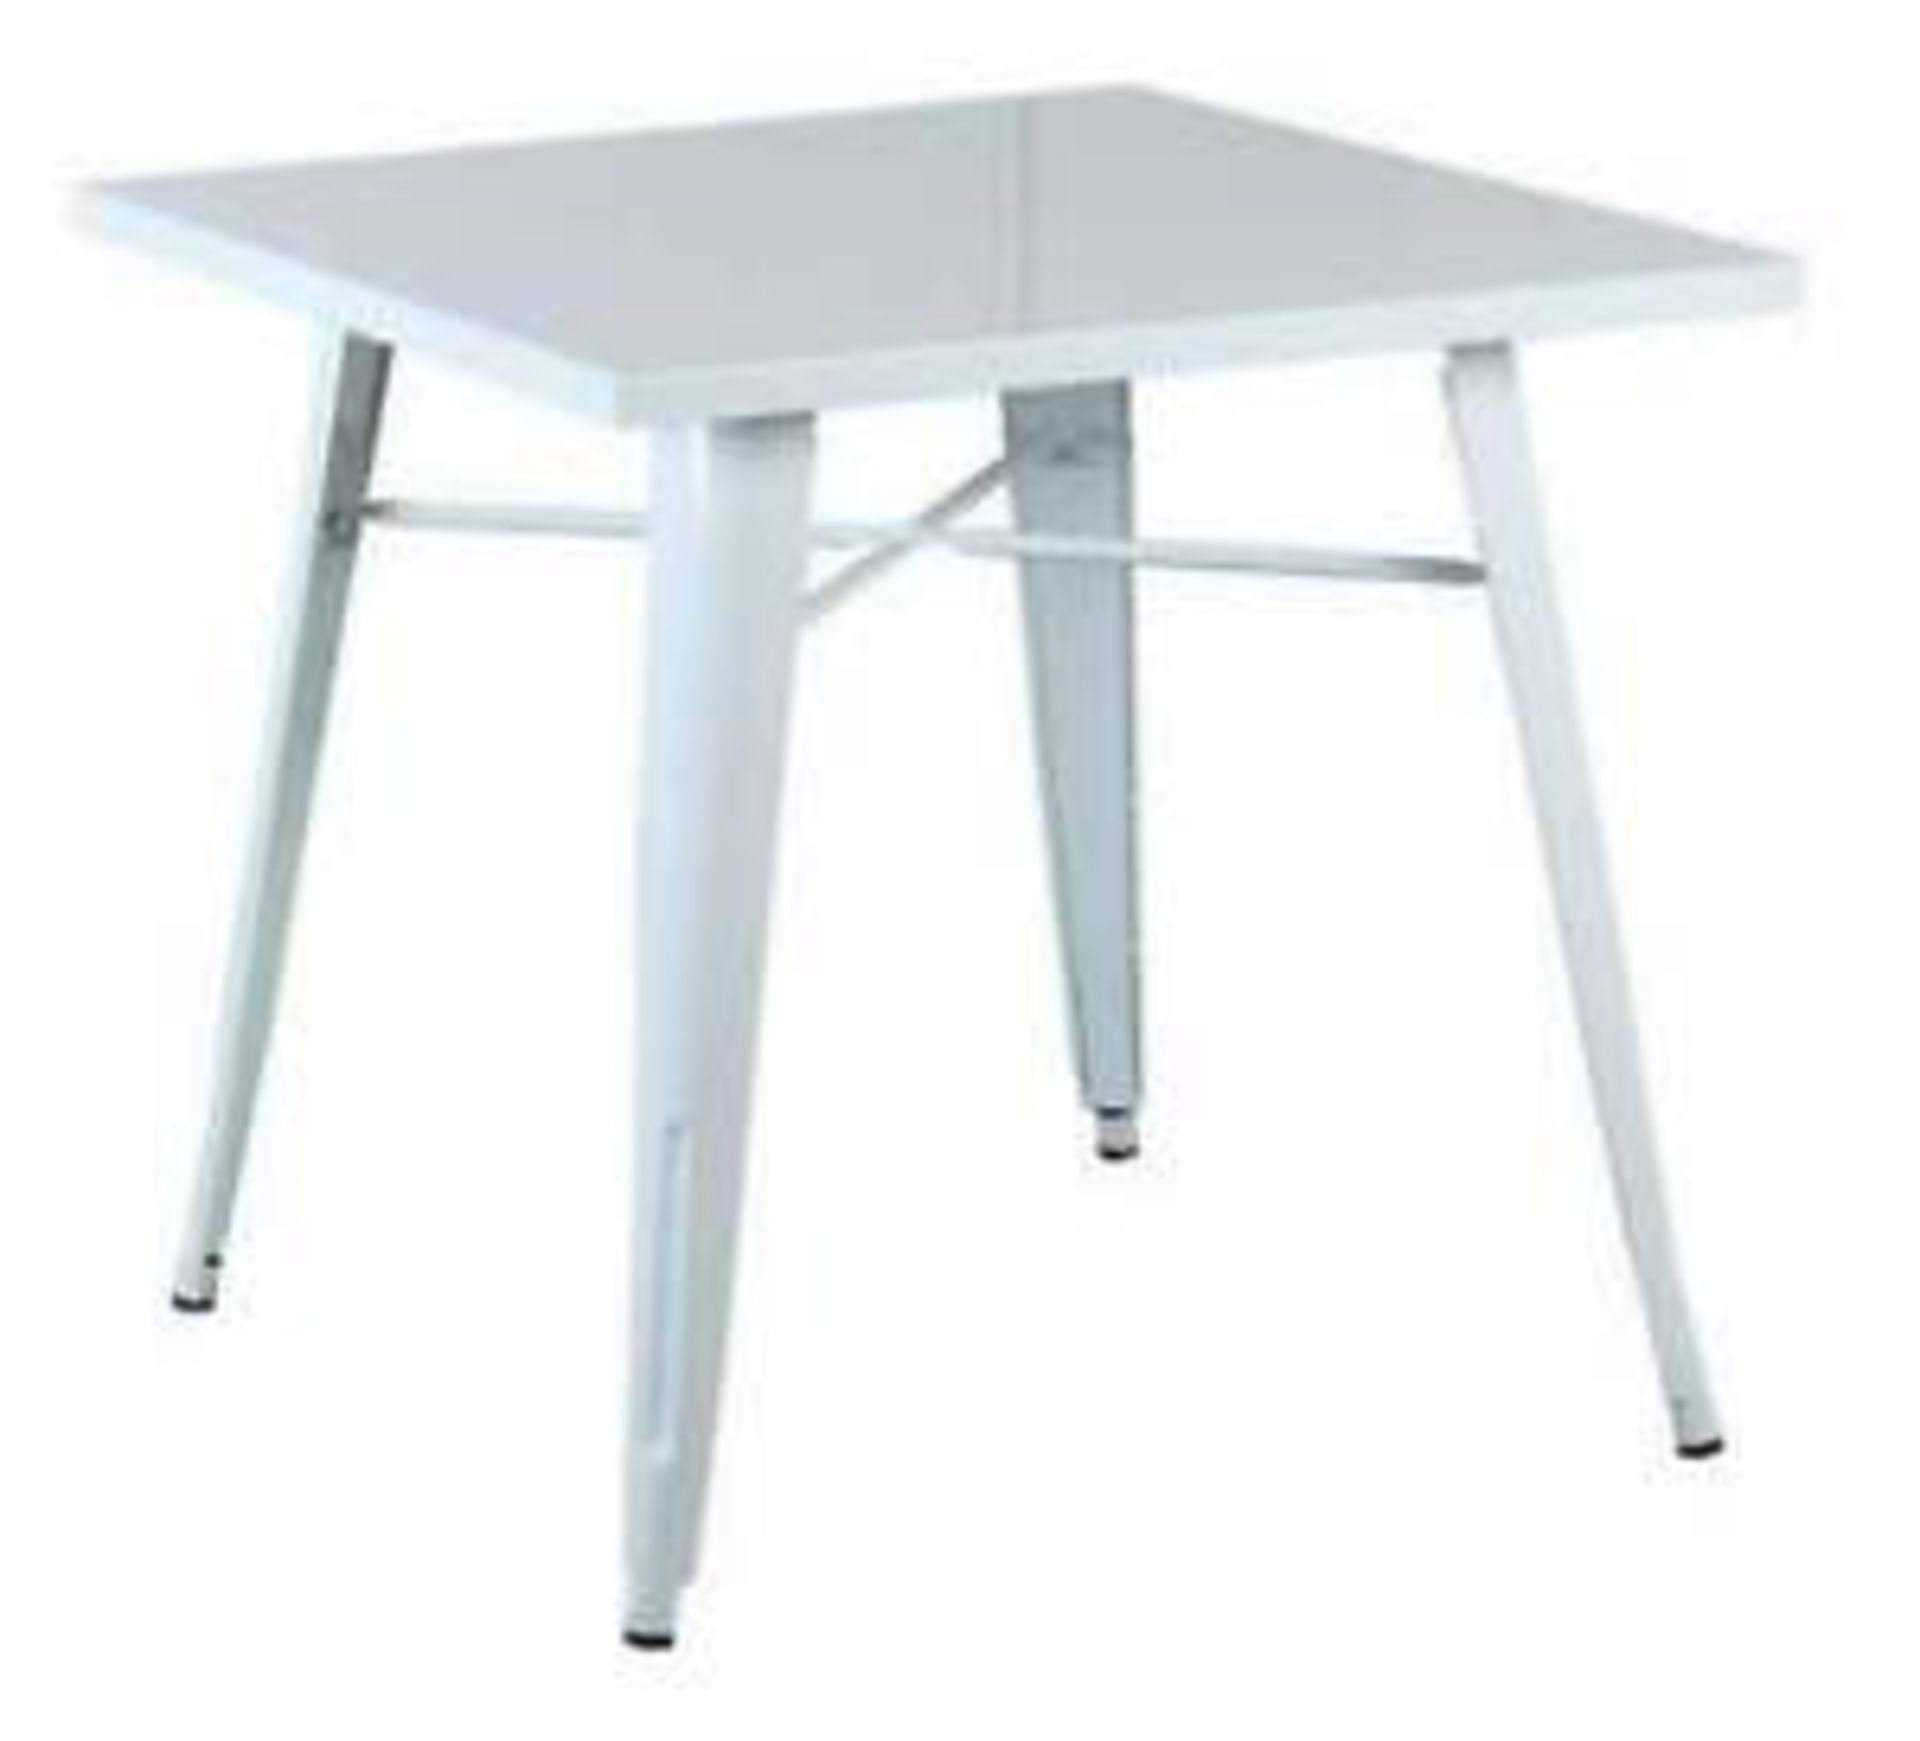 1 x Tolix Industrial Style Outdoor Bistro Table and Chair Set in White- Includes 1 x Table and 4 x - Image 5 of 5